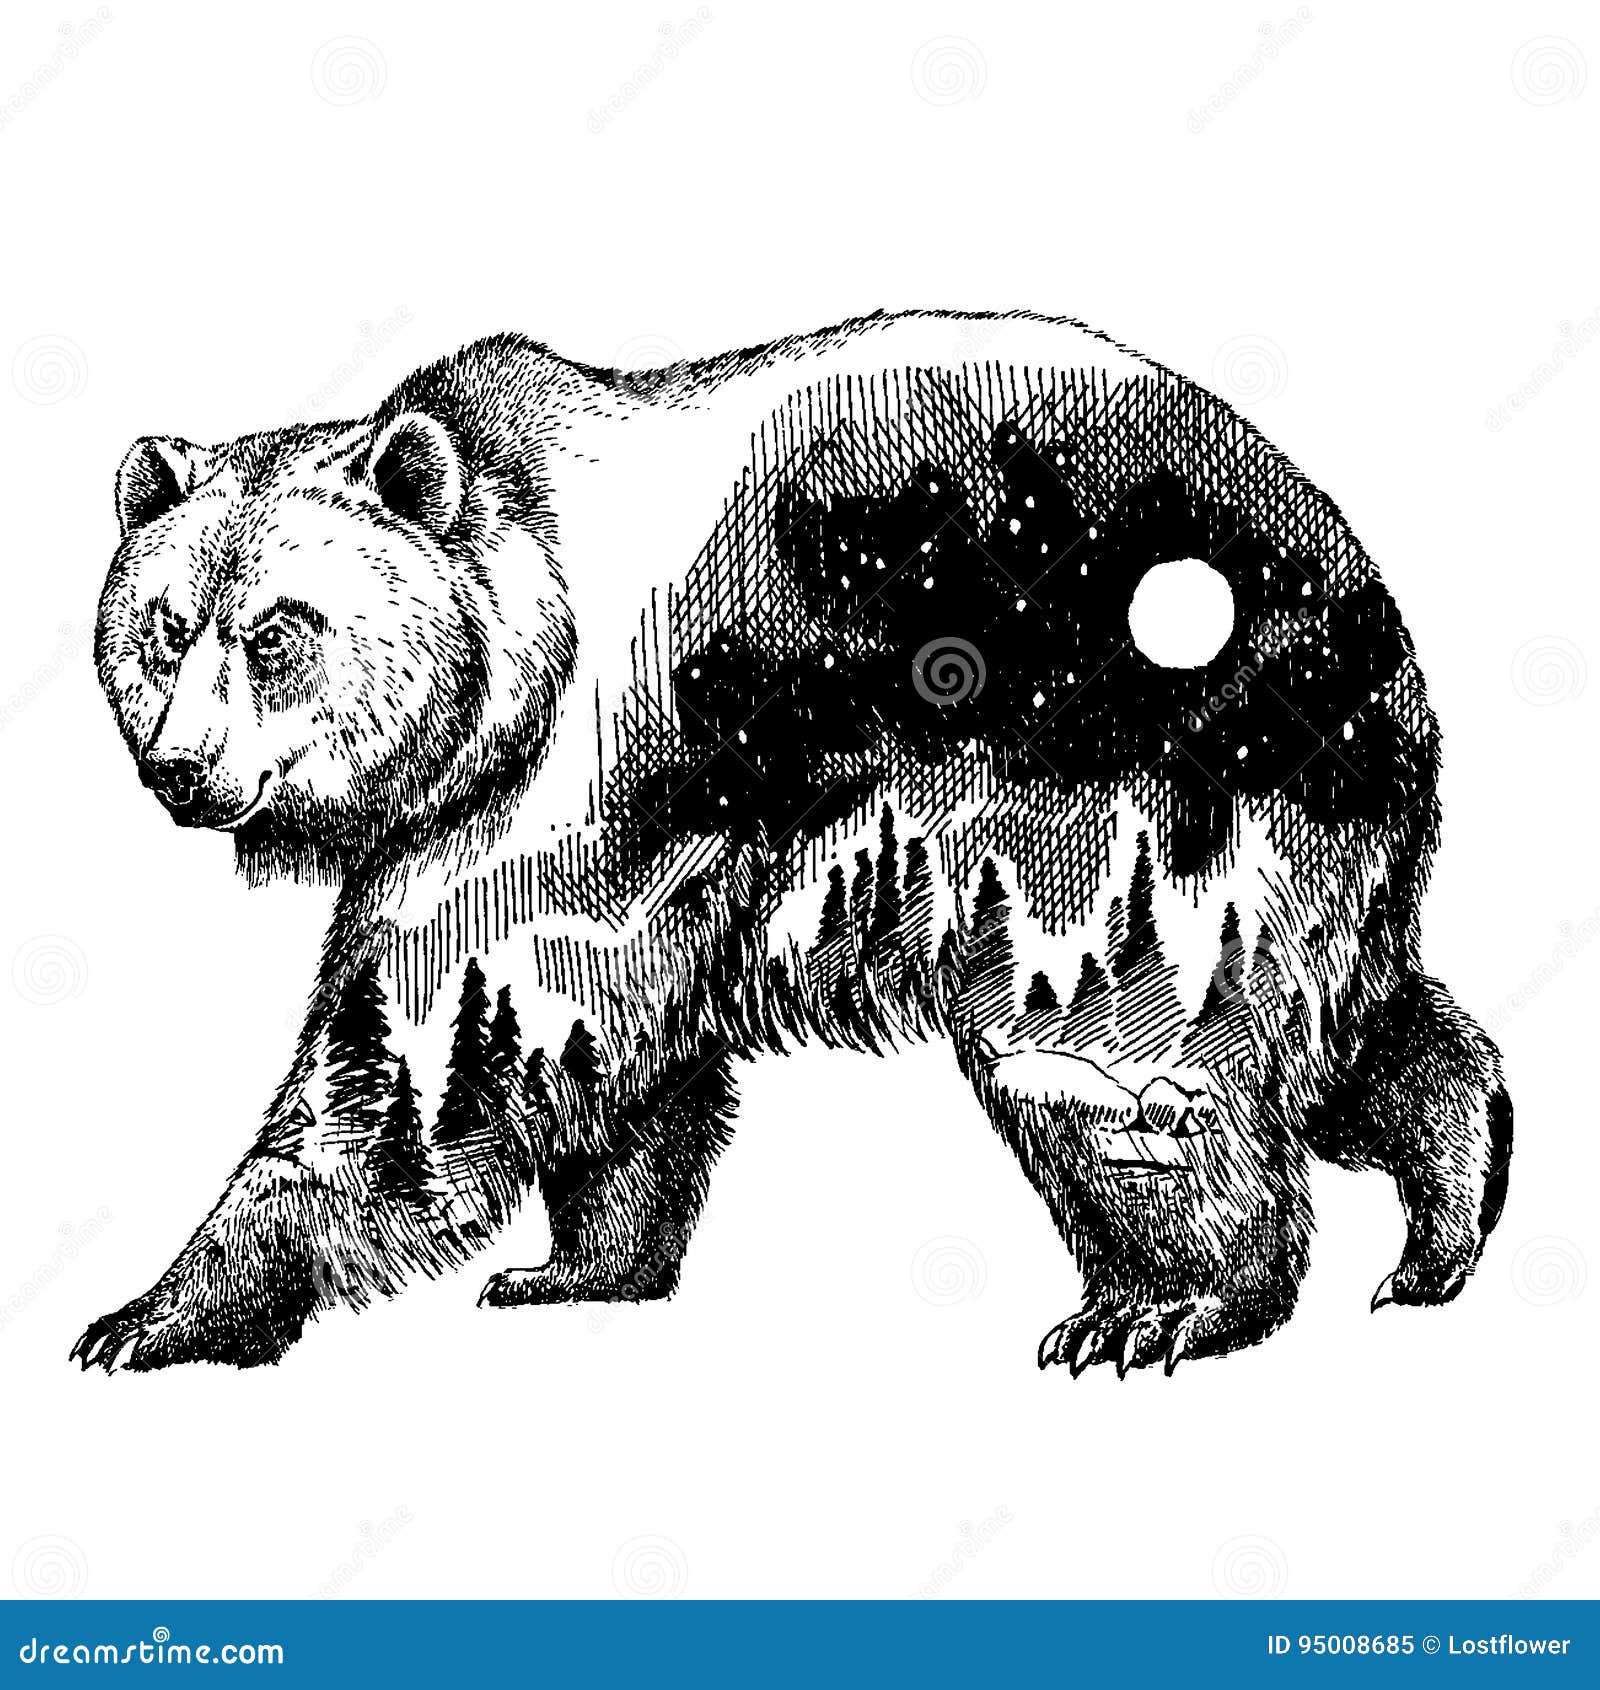 A guy and an angry bear in a forest sunset behind the mountains tattoo idea   TattoosAI